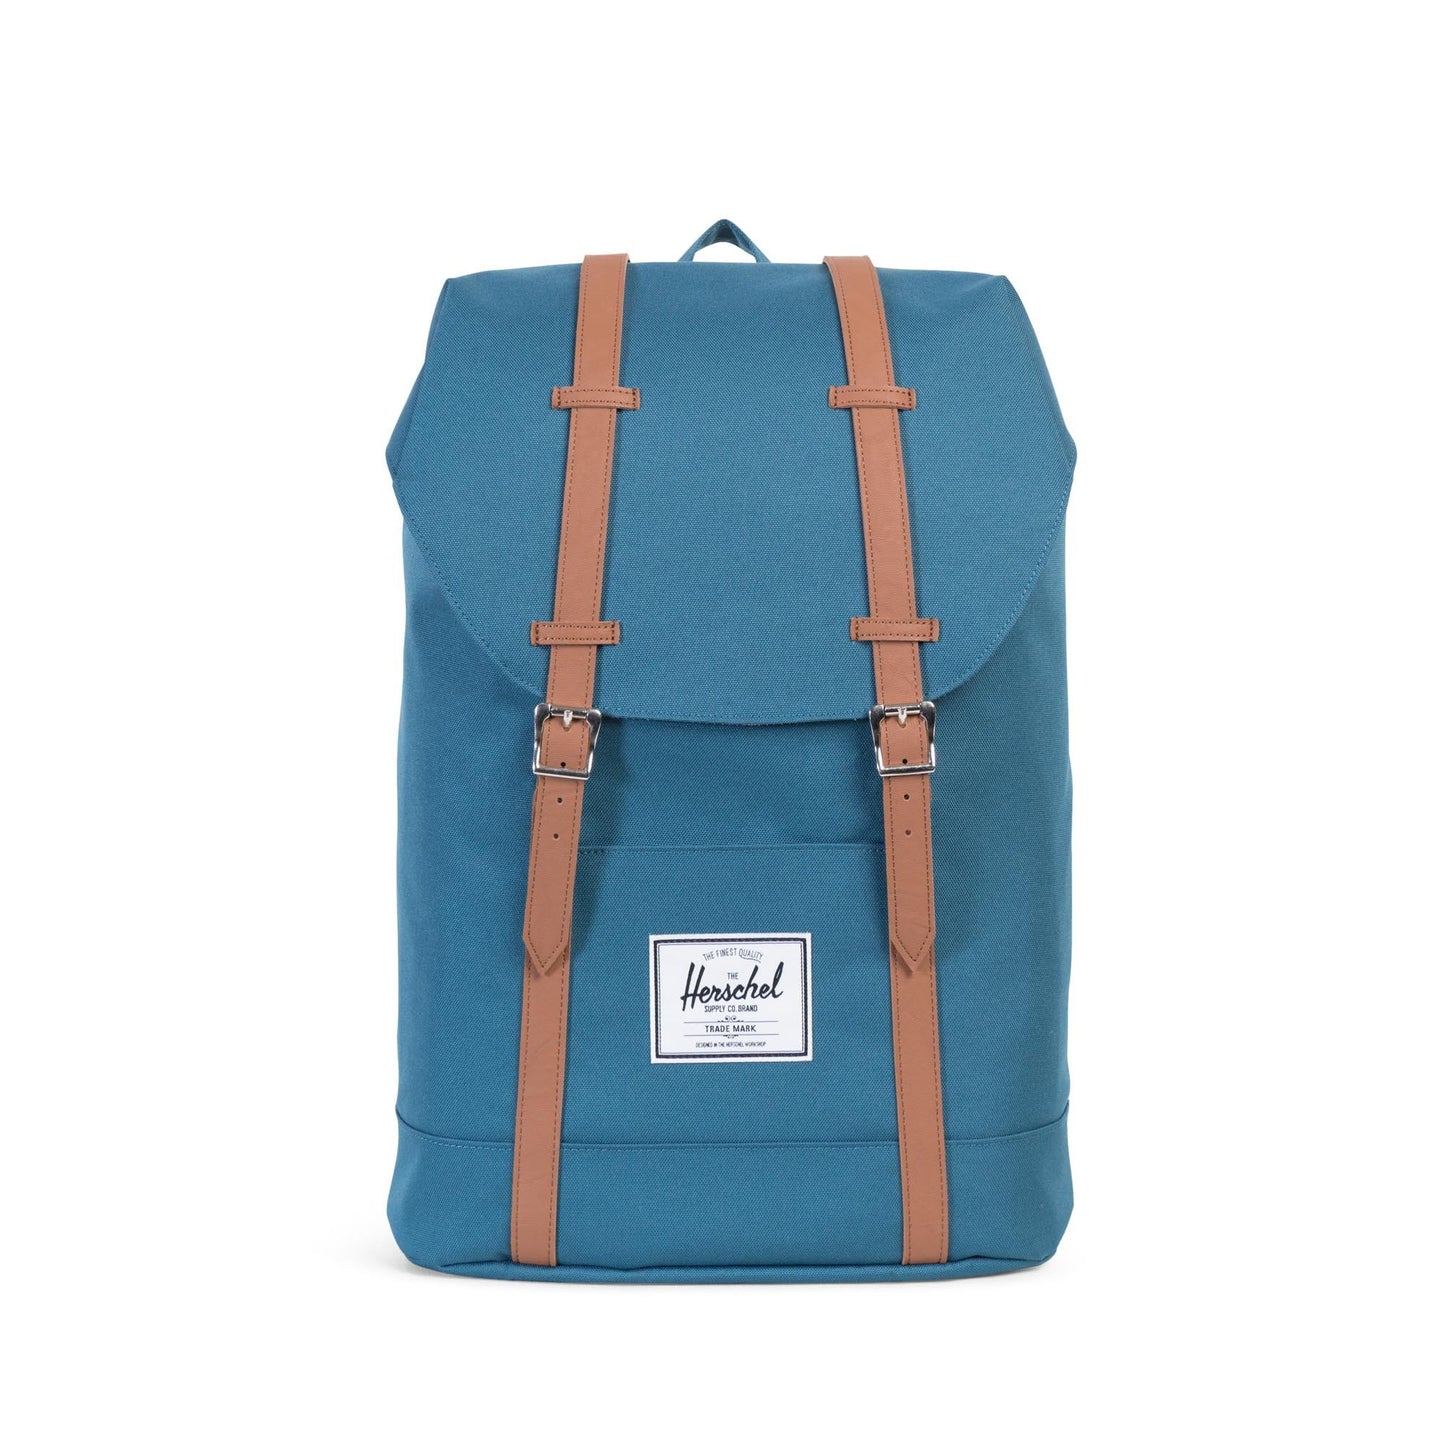 Herschel Supply Co. - Retreat Backpack, Indian Teal - The Giant Peach